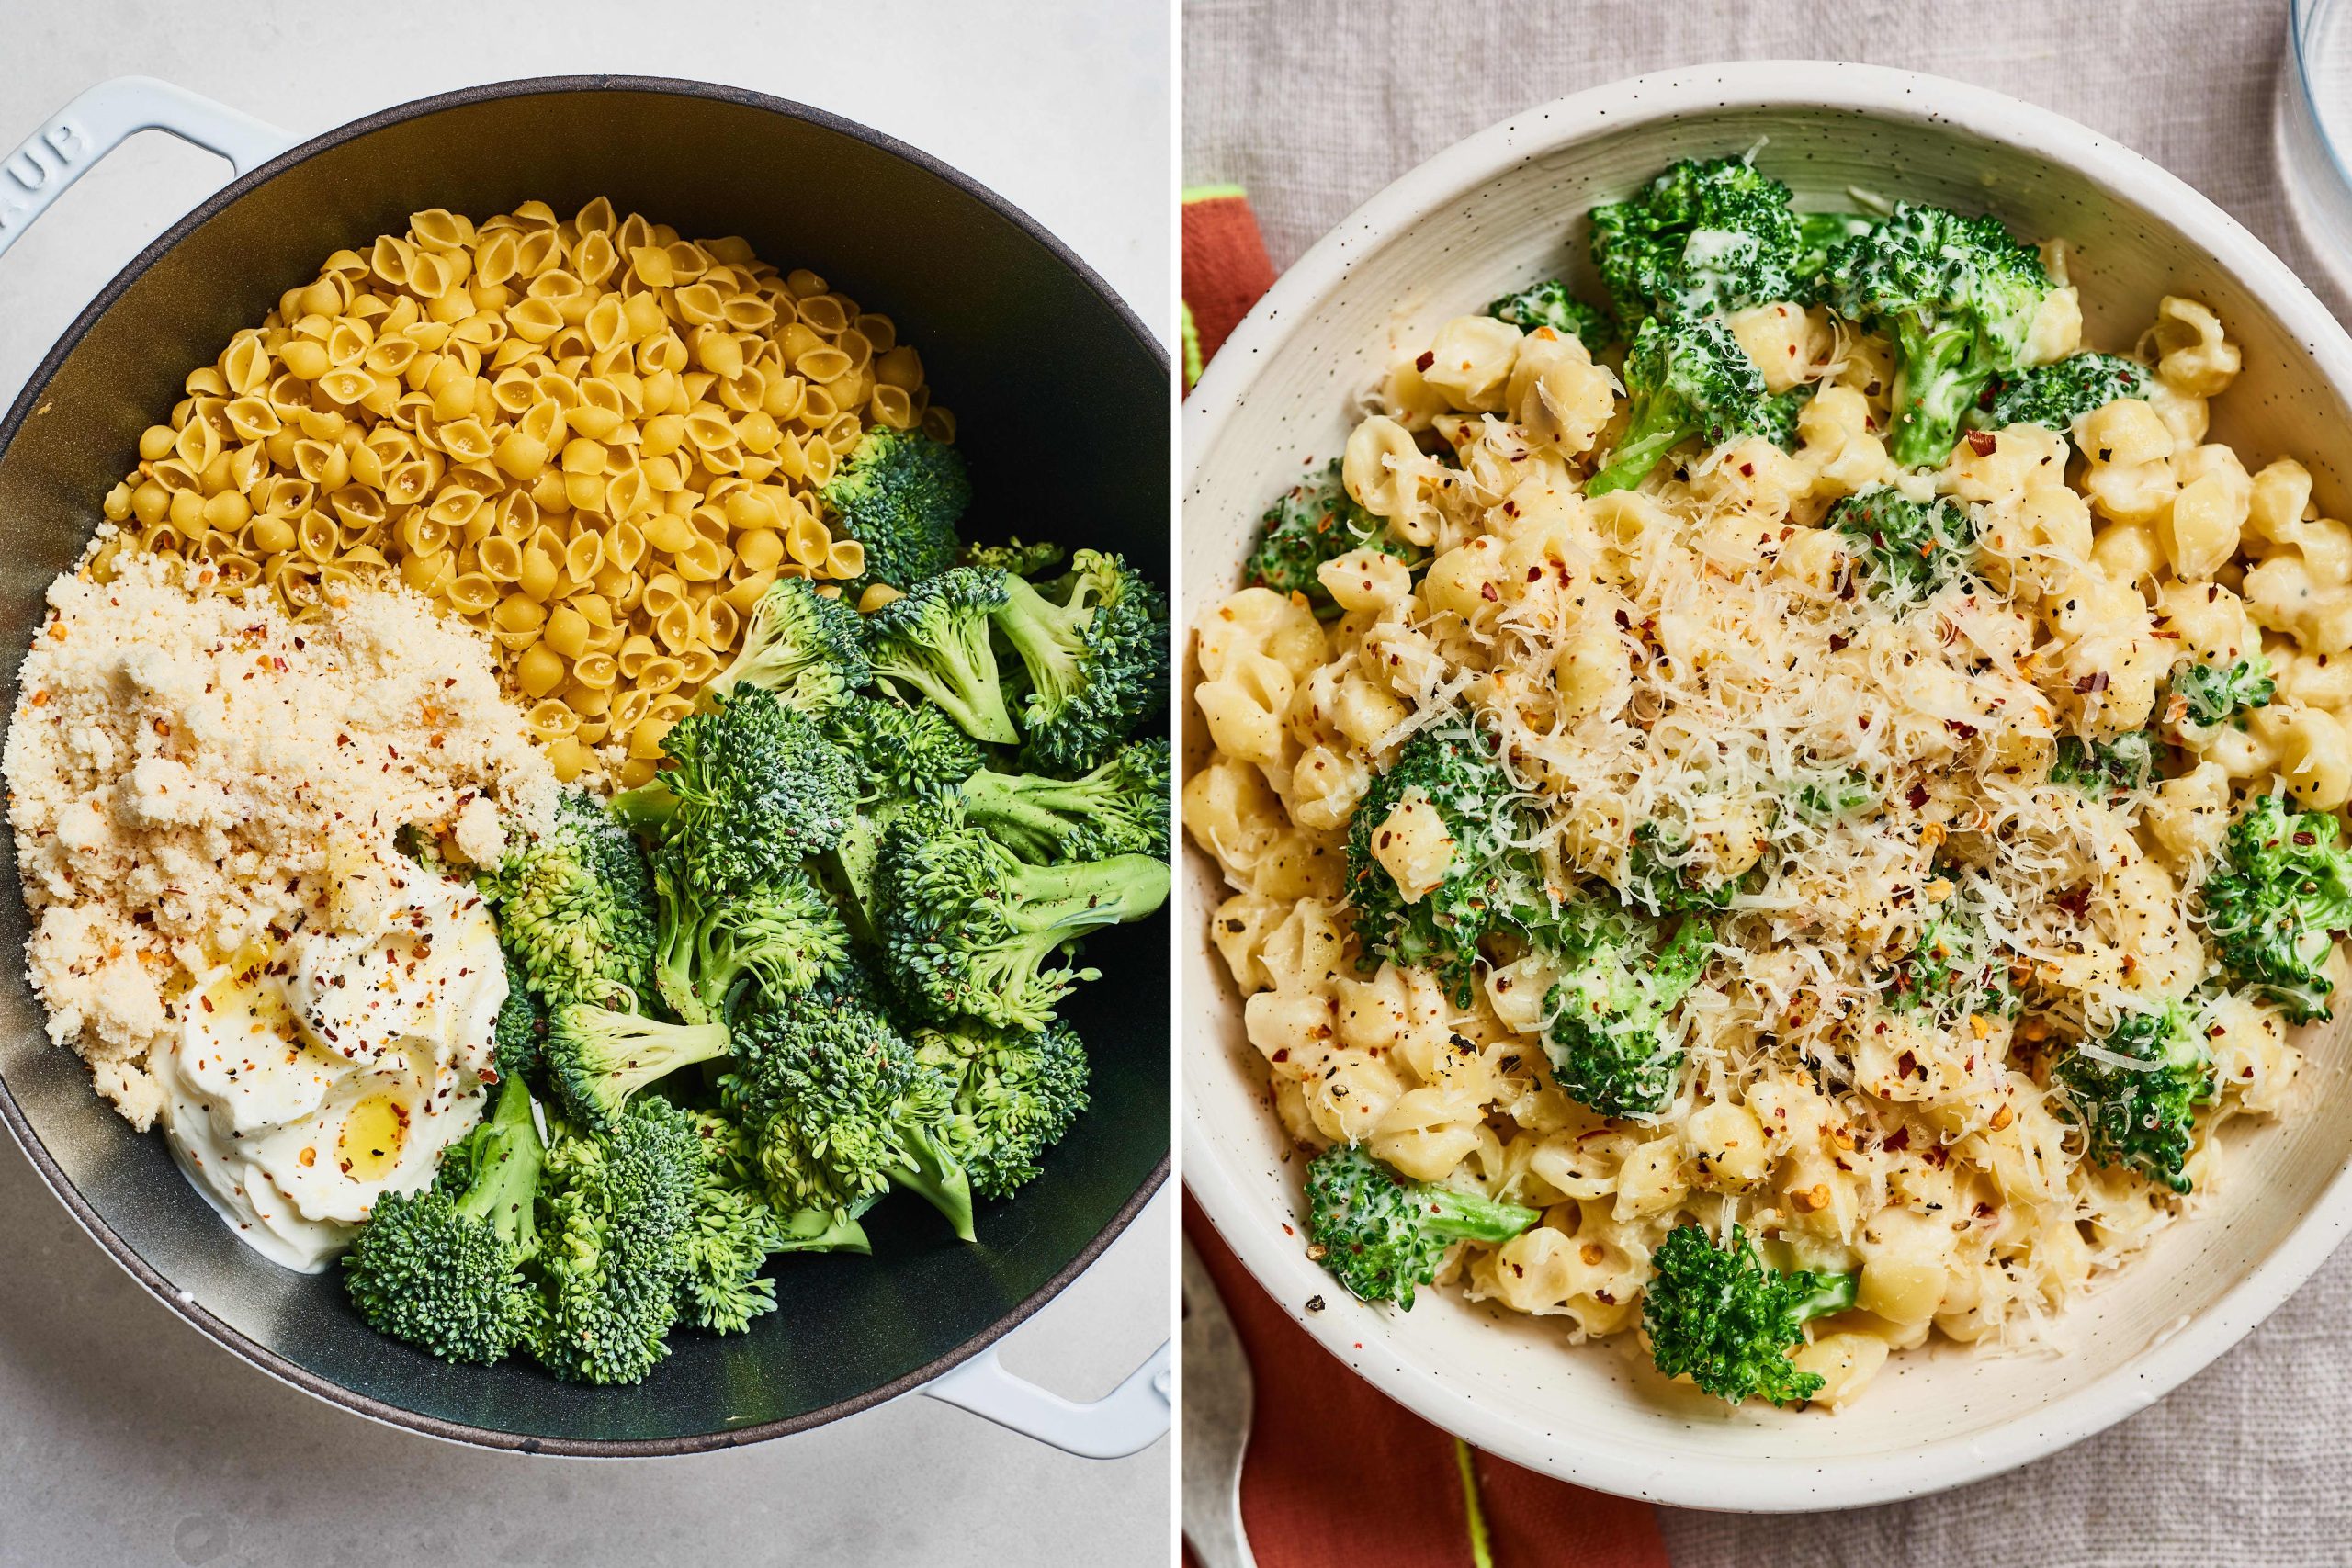 5 Flavorful Vegetarian Recipes for a Delicious Meatless Meal